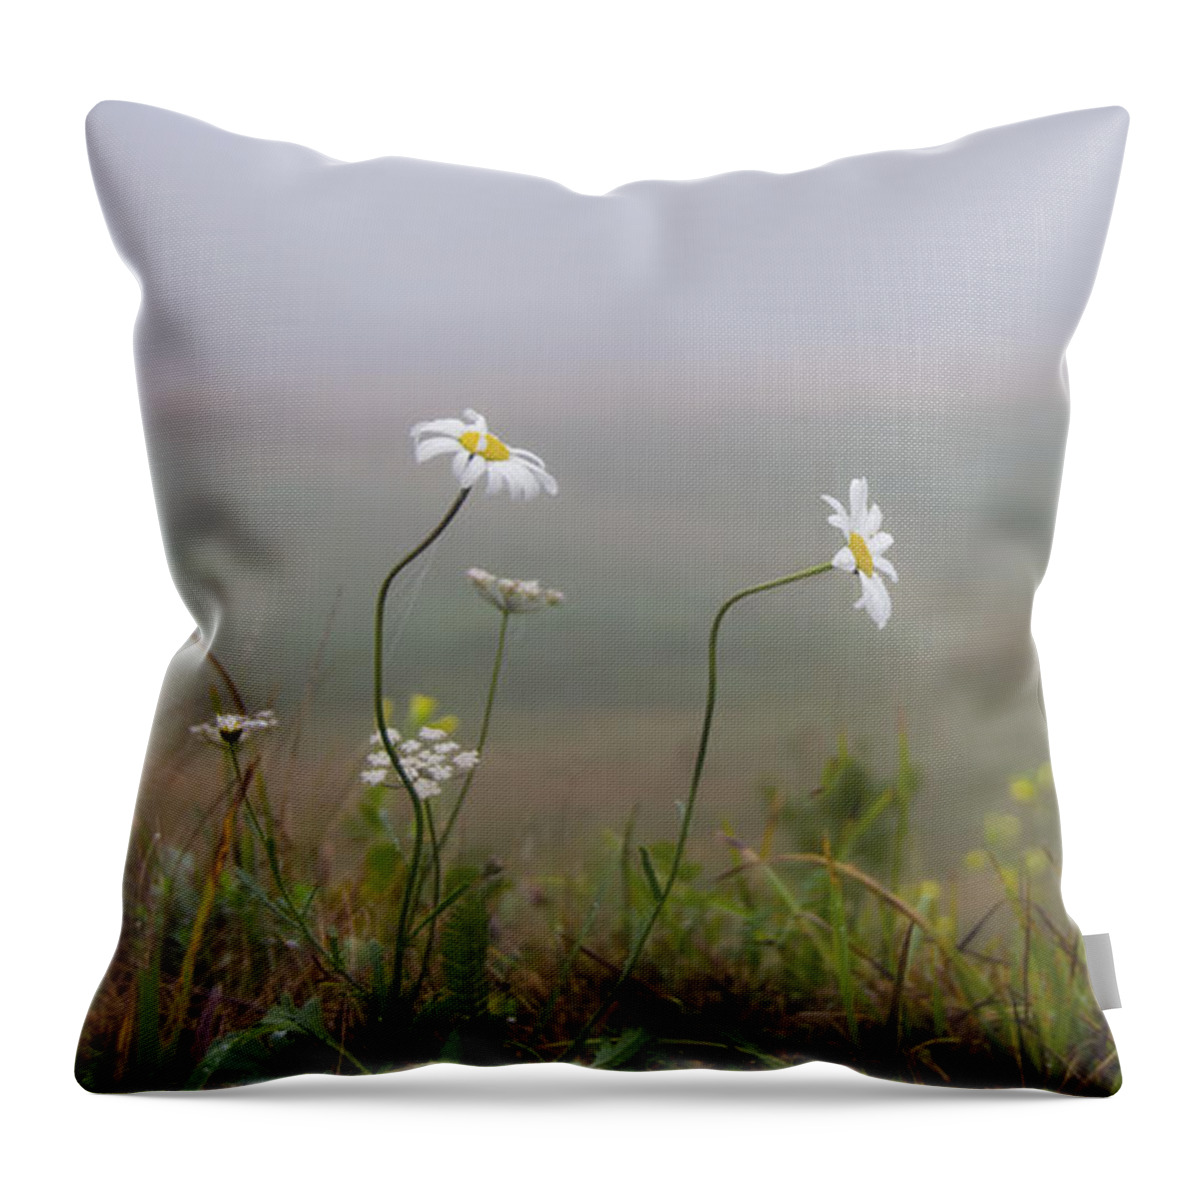 2015 Throw Pillow featuring the photograph I Watched You Walk Away by Sandra Parlow